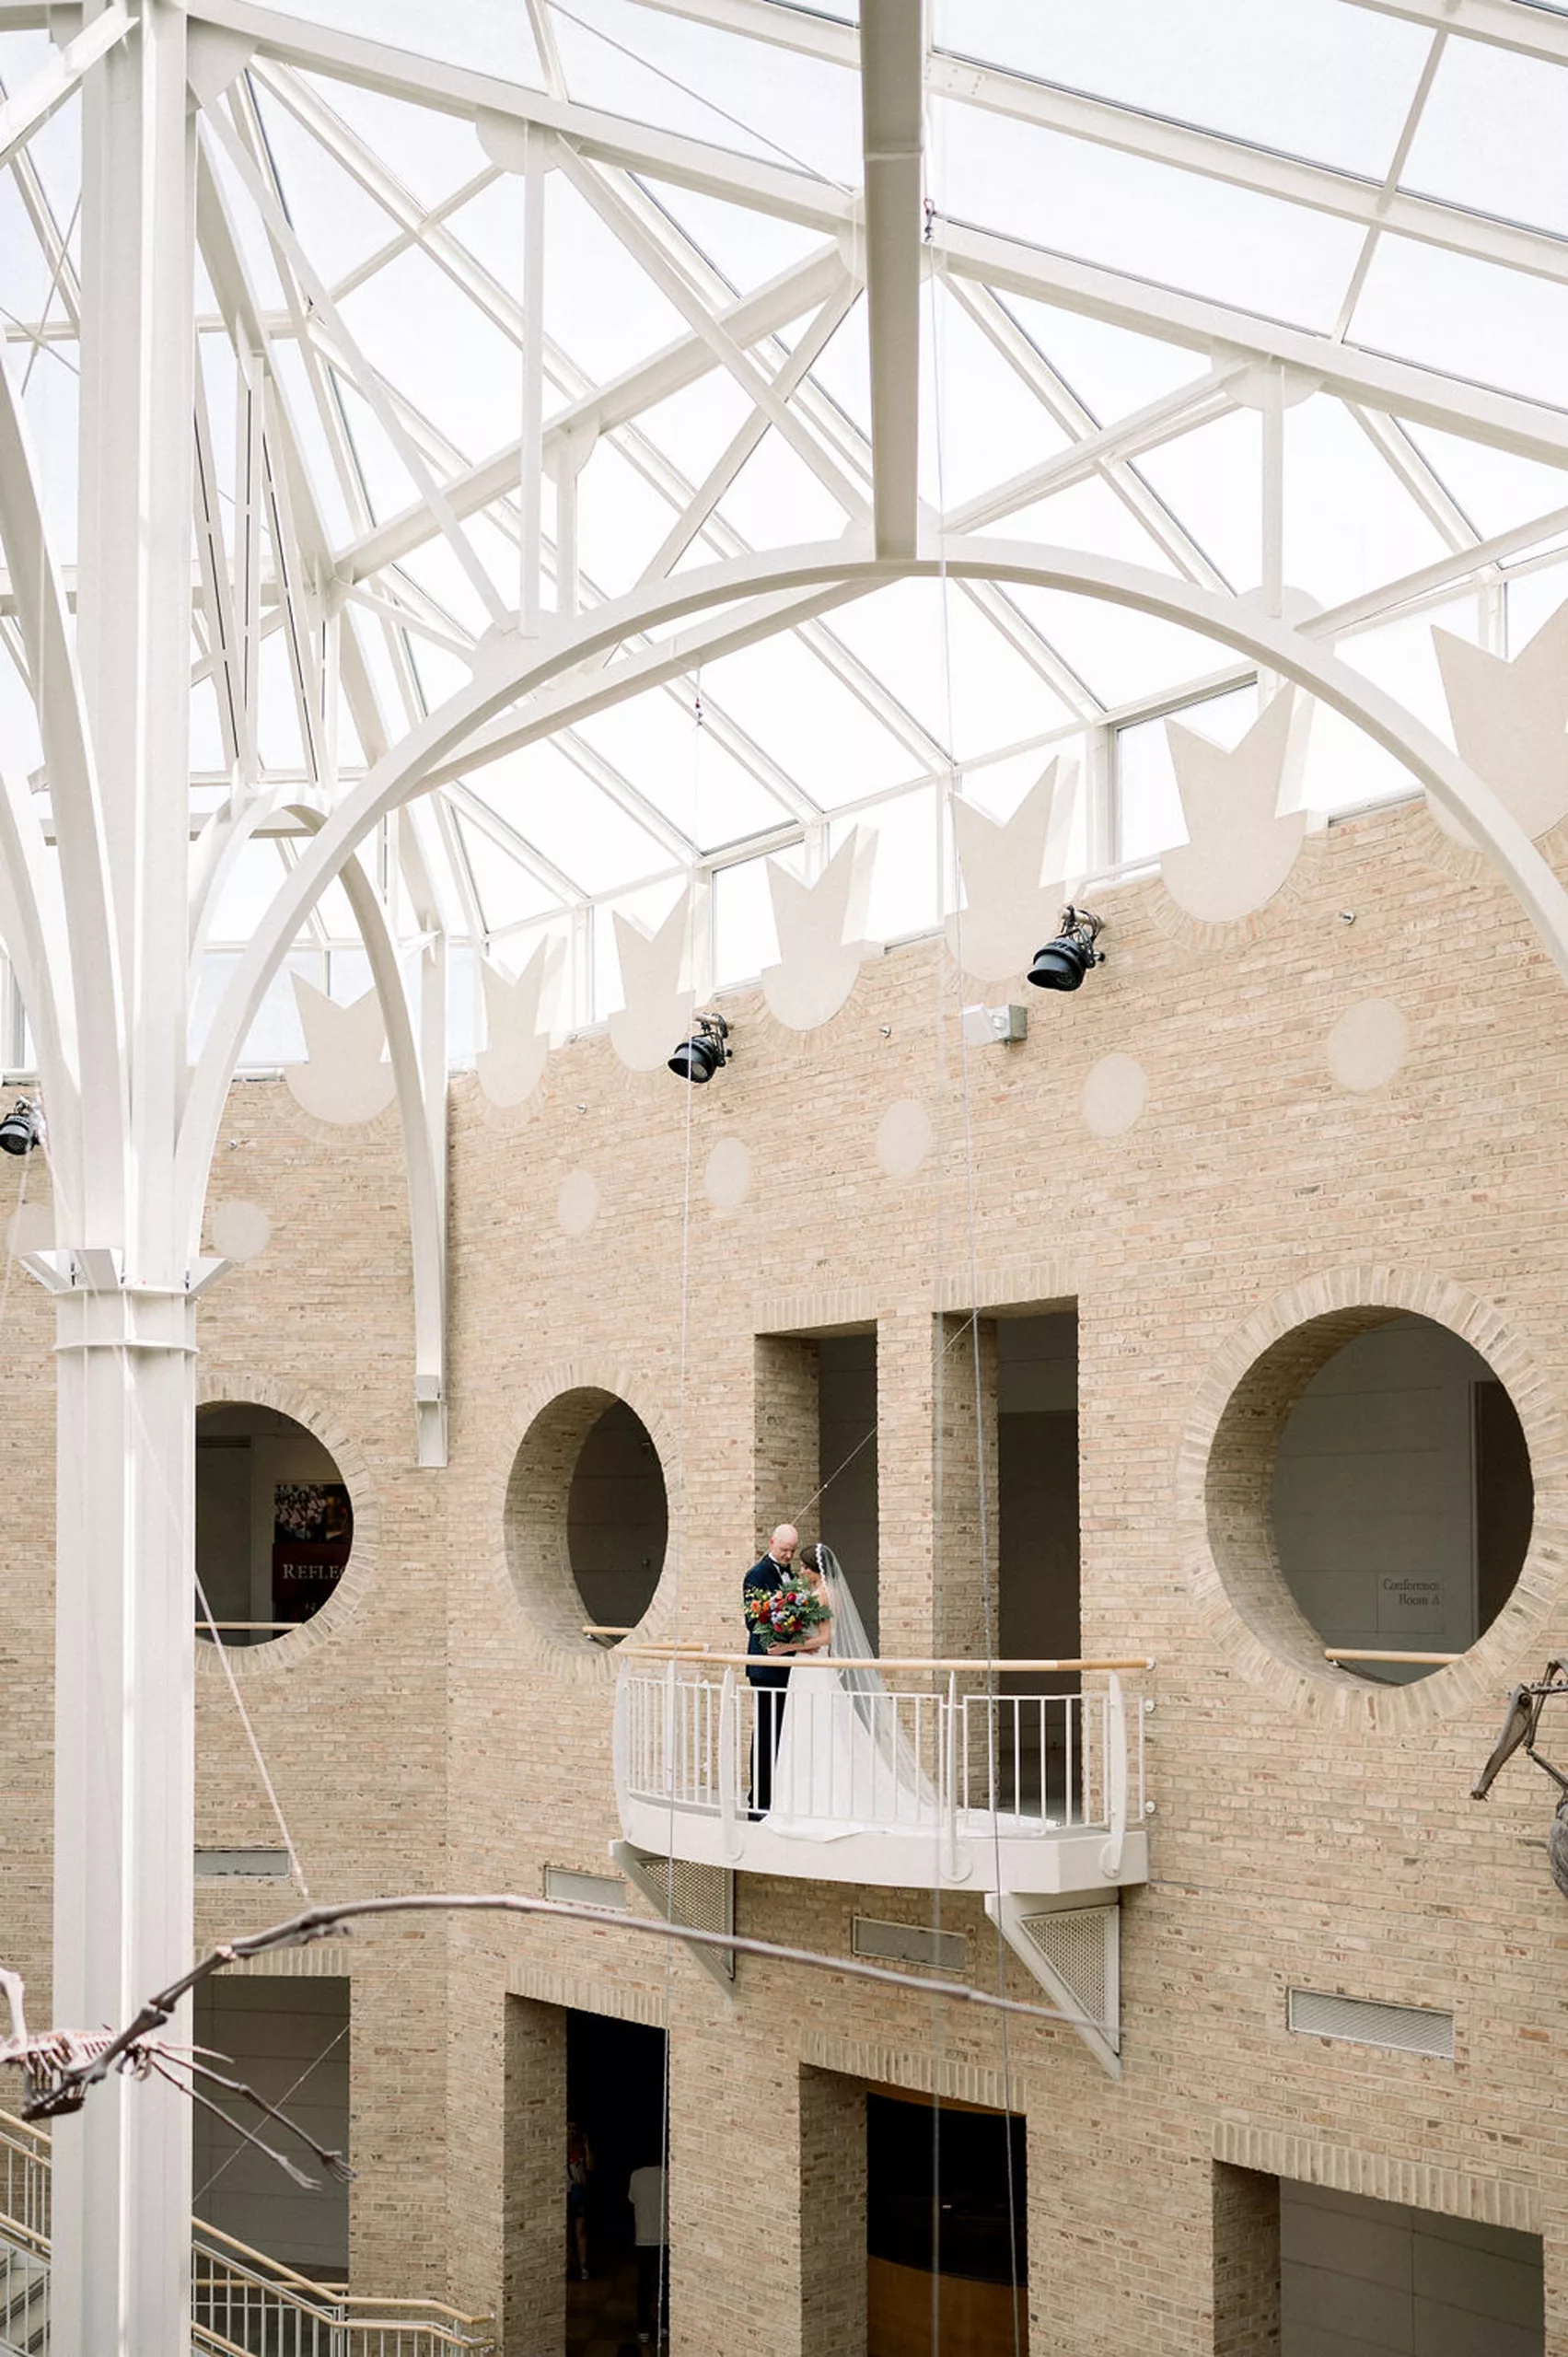 Newlyweds dance alone on a balcony in a museum overlooking dinosaur skeletons